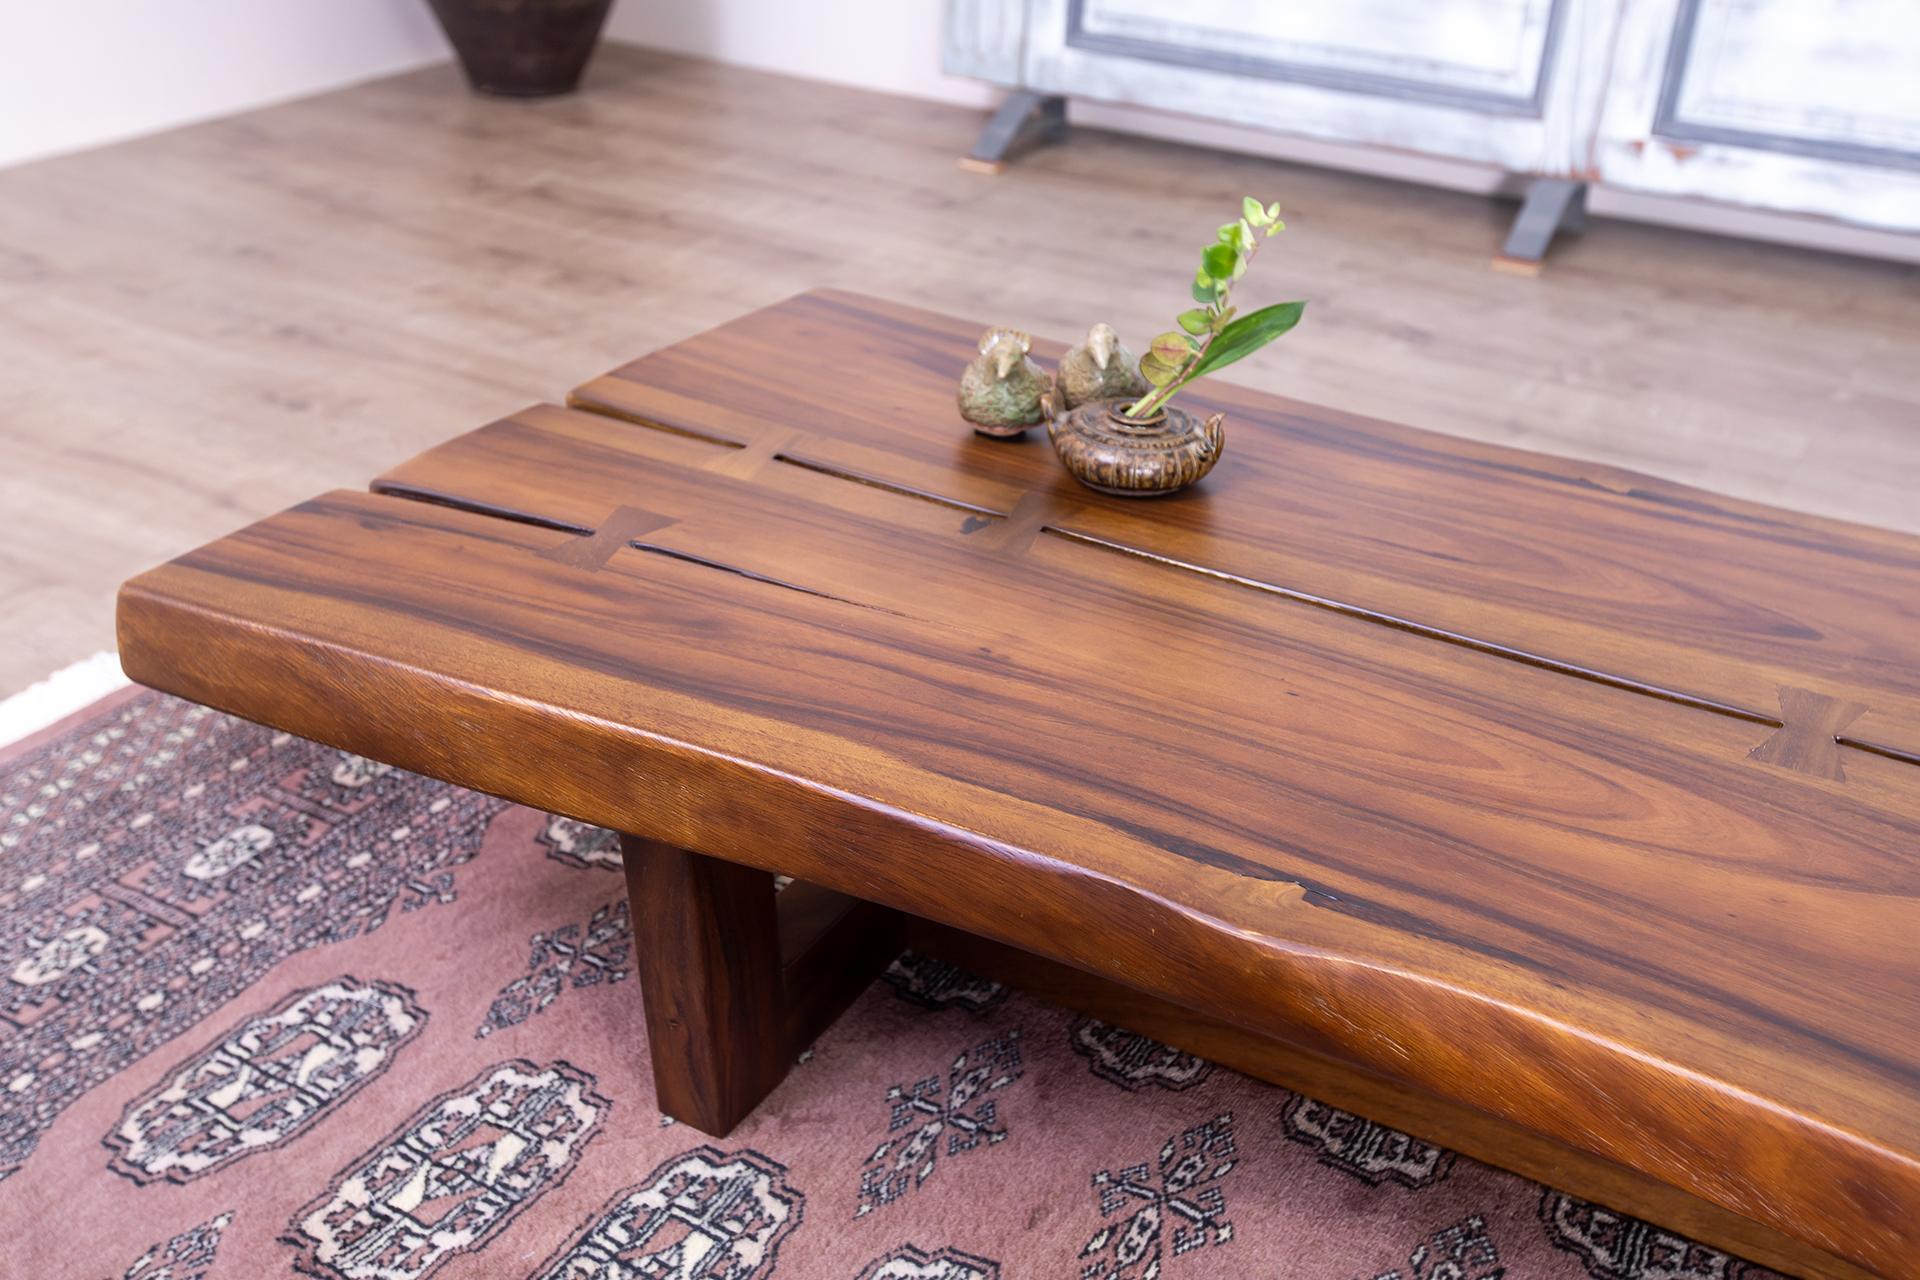 The Table Company makes only 100% solid, hardwood furniture.  We primarily use Thai/Burmese Teak, North American Red and White Oak, and old-growth Cham-Cha (Siam Acacia).  Unlike many mass-market manufacturers and retailers, our furniture is made